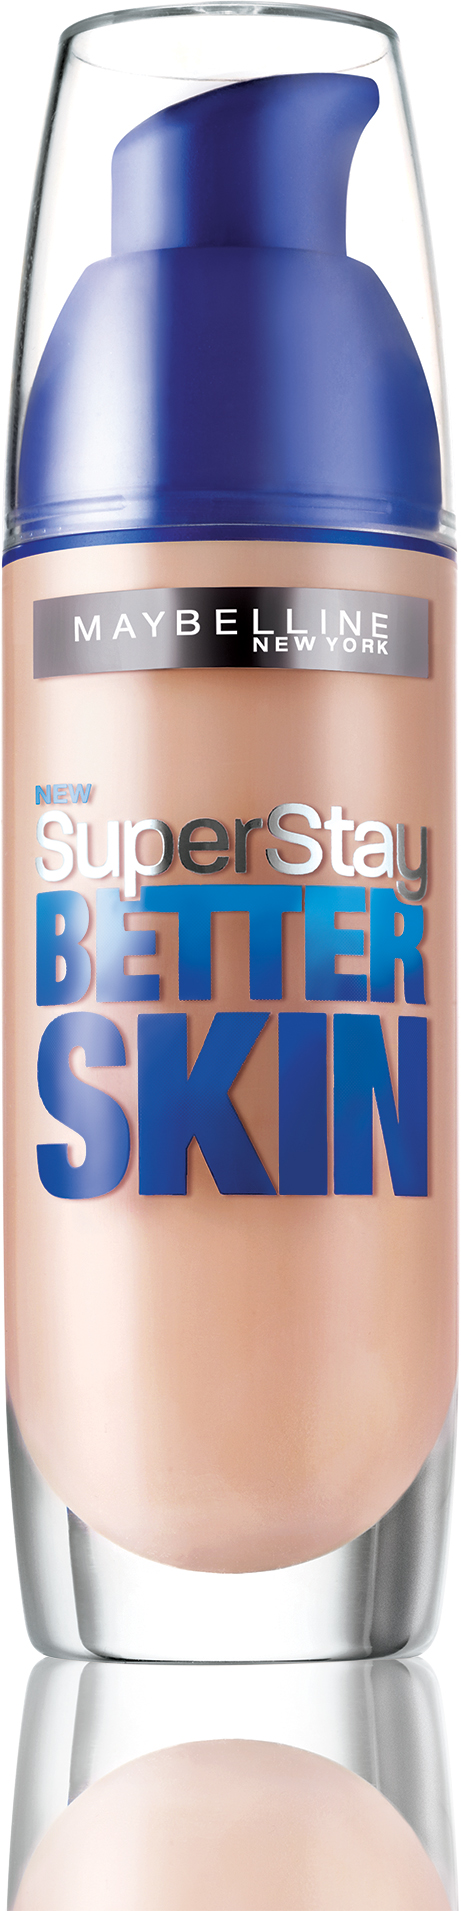 may_superstay_betterskin_product.jpg